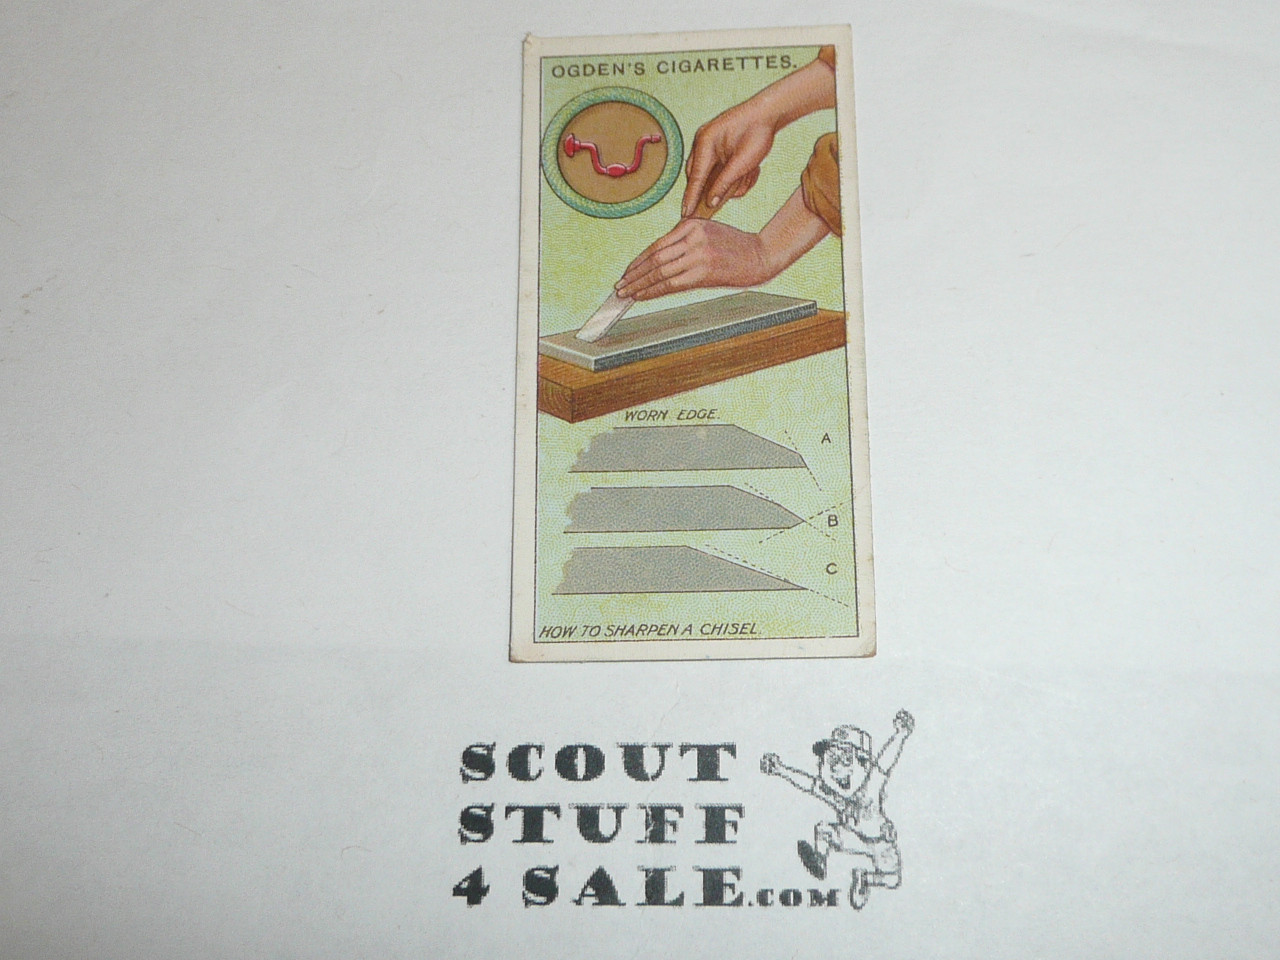 Ogden Tabacco Company Premium Card, Third Boy Scout Series of 50 (Blue Backs), Card #109 How to Sharpen a Chisel, 1912